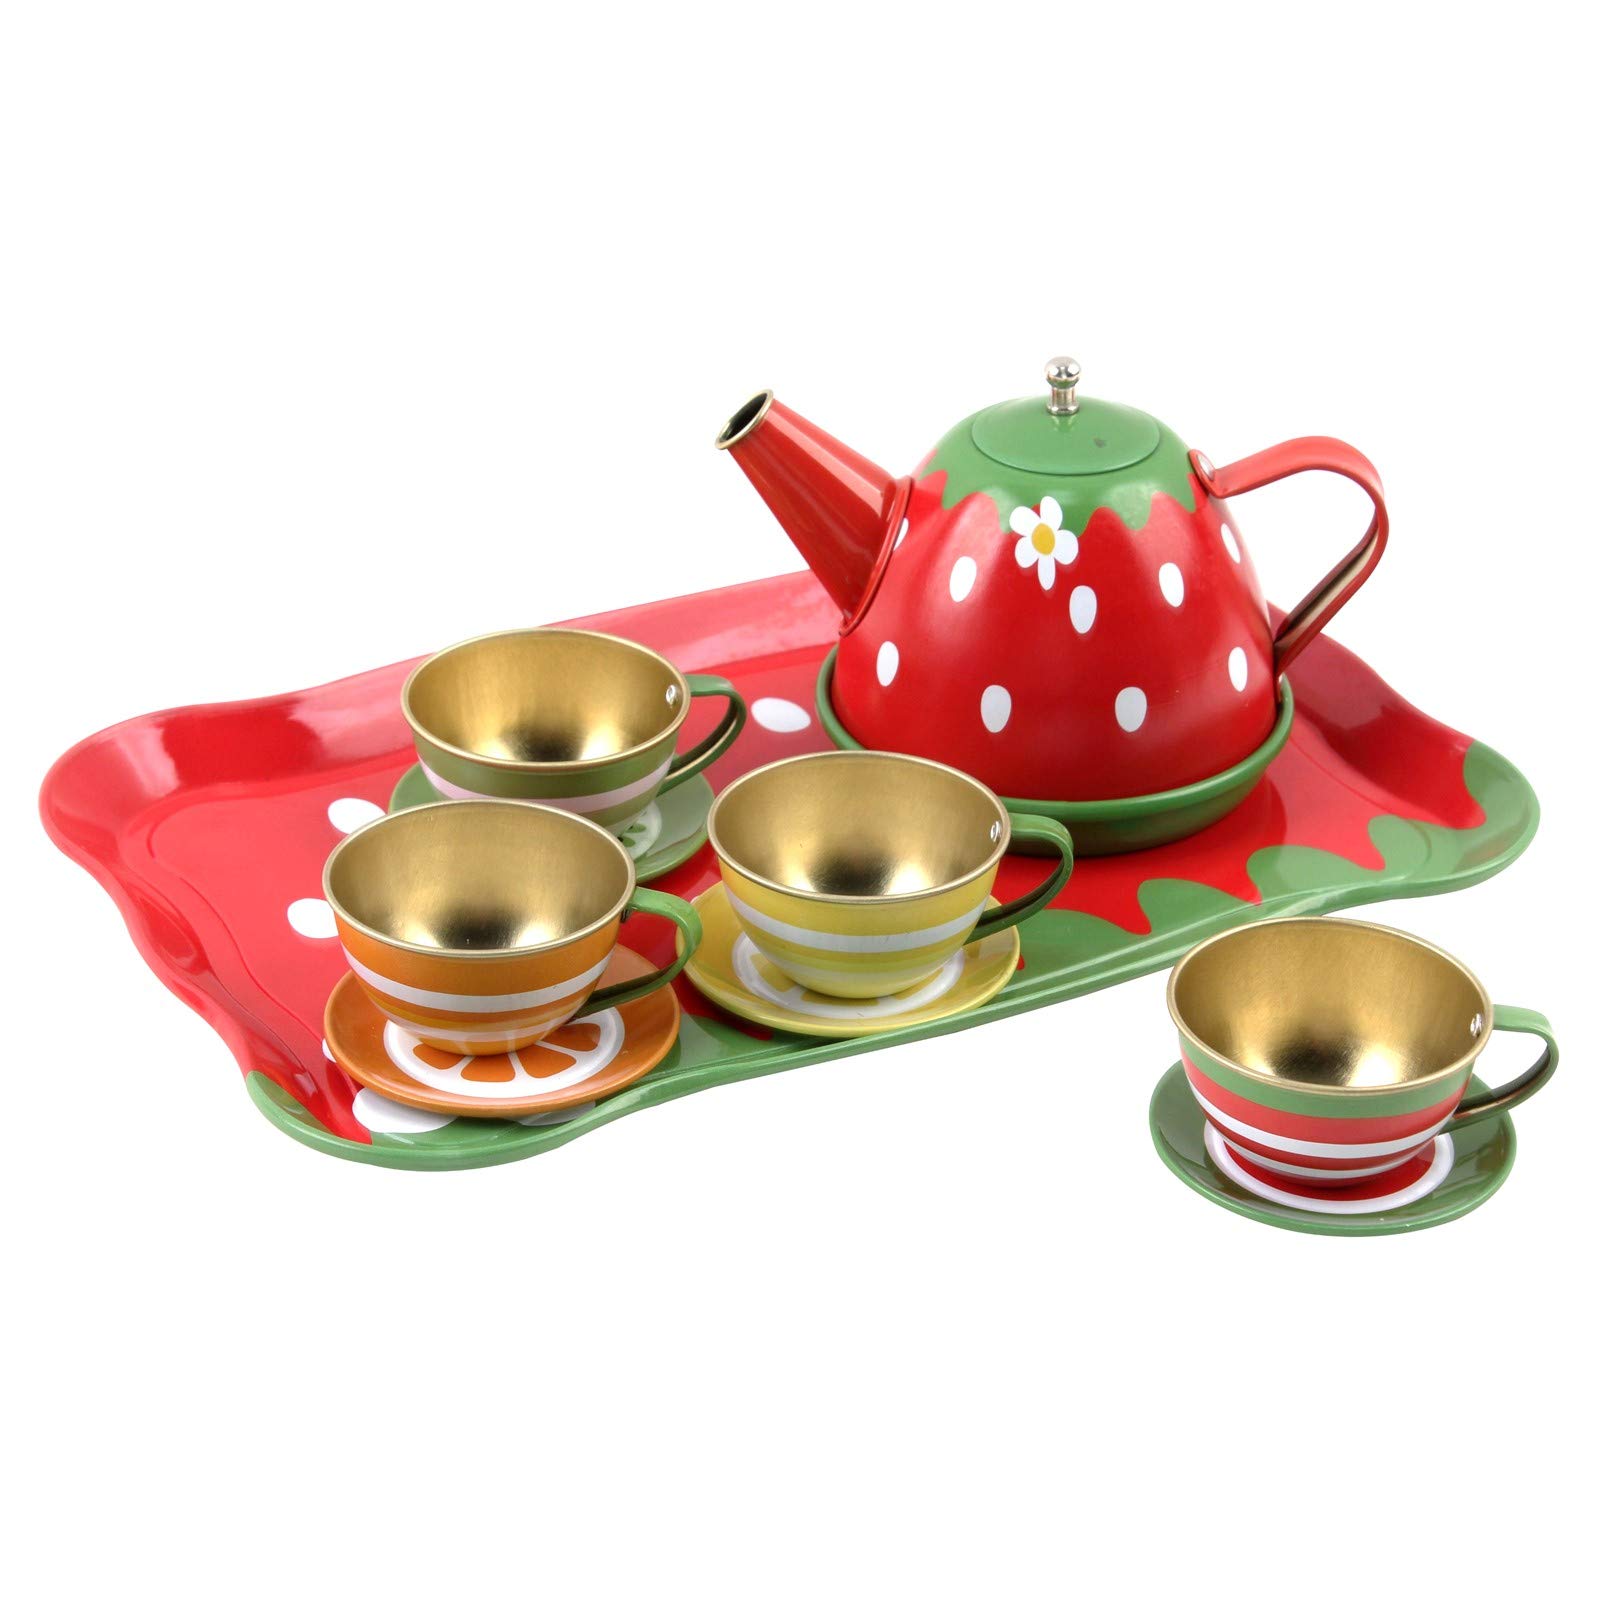 Vokodo Kids Fruit Themed Pretend Play Tea Set 14 Piece Durably Built from Food-Safe Material BPA-Free Kitchen Playset Perfect Early Learning Preschool Toy Great Gift for Children Girls Boys Toddlers